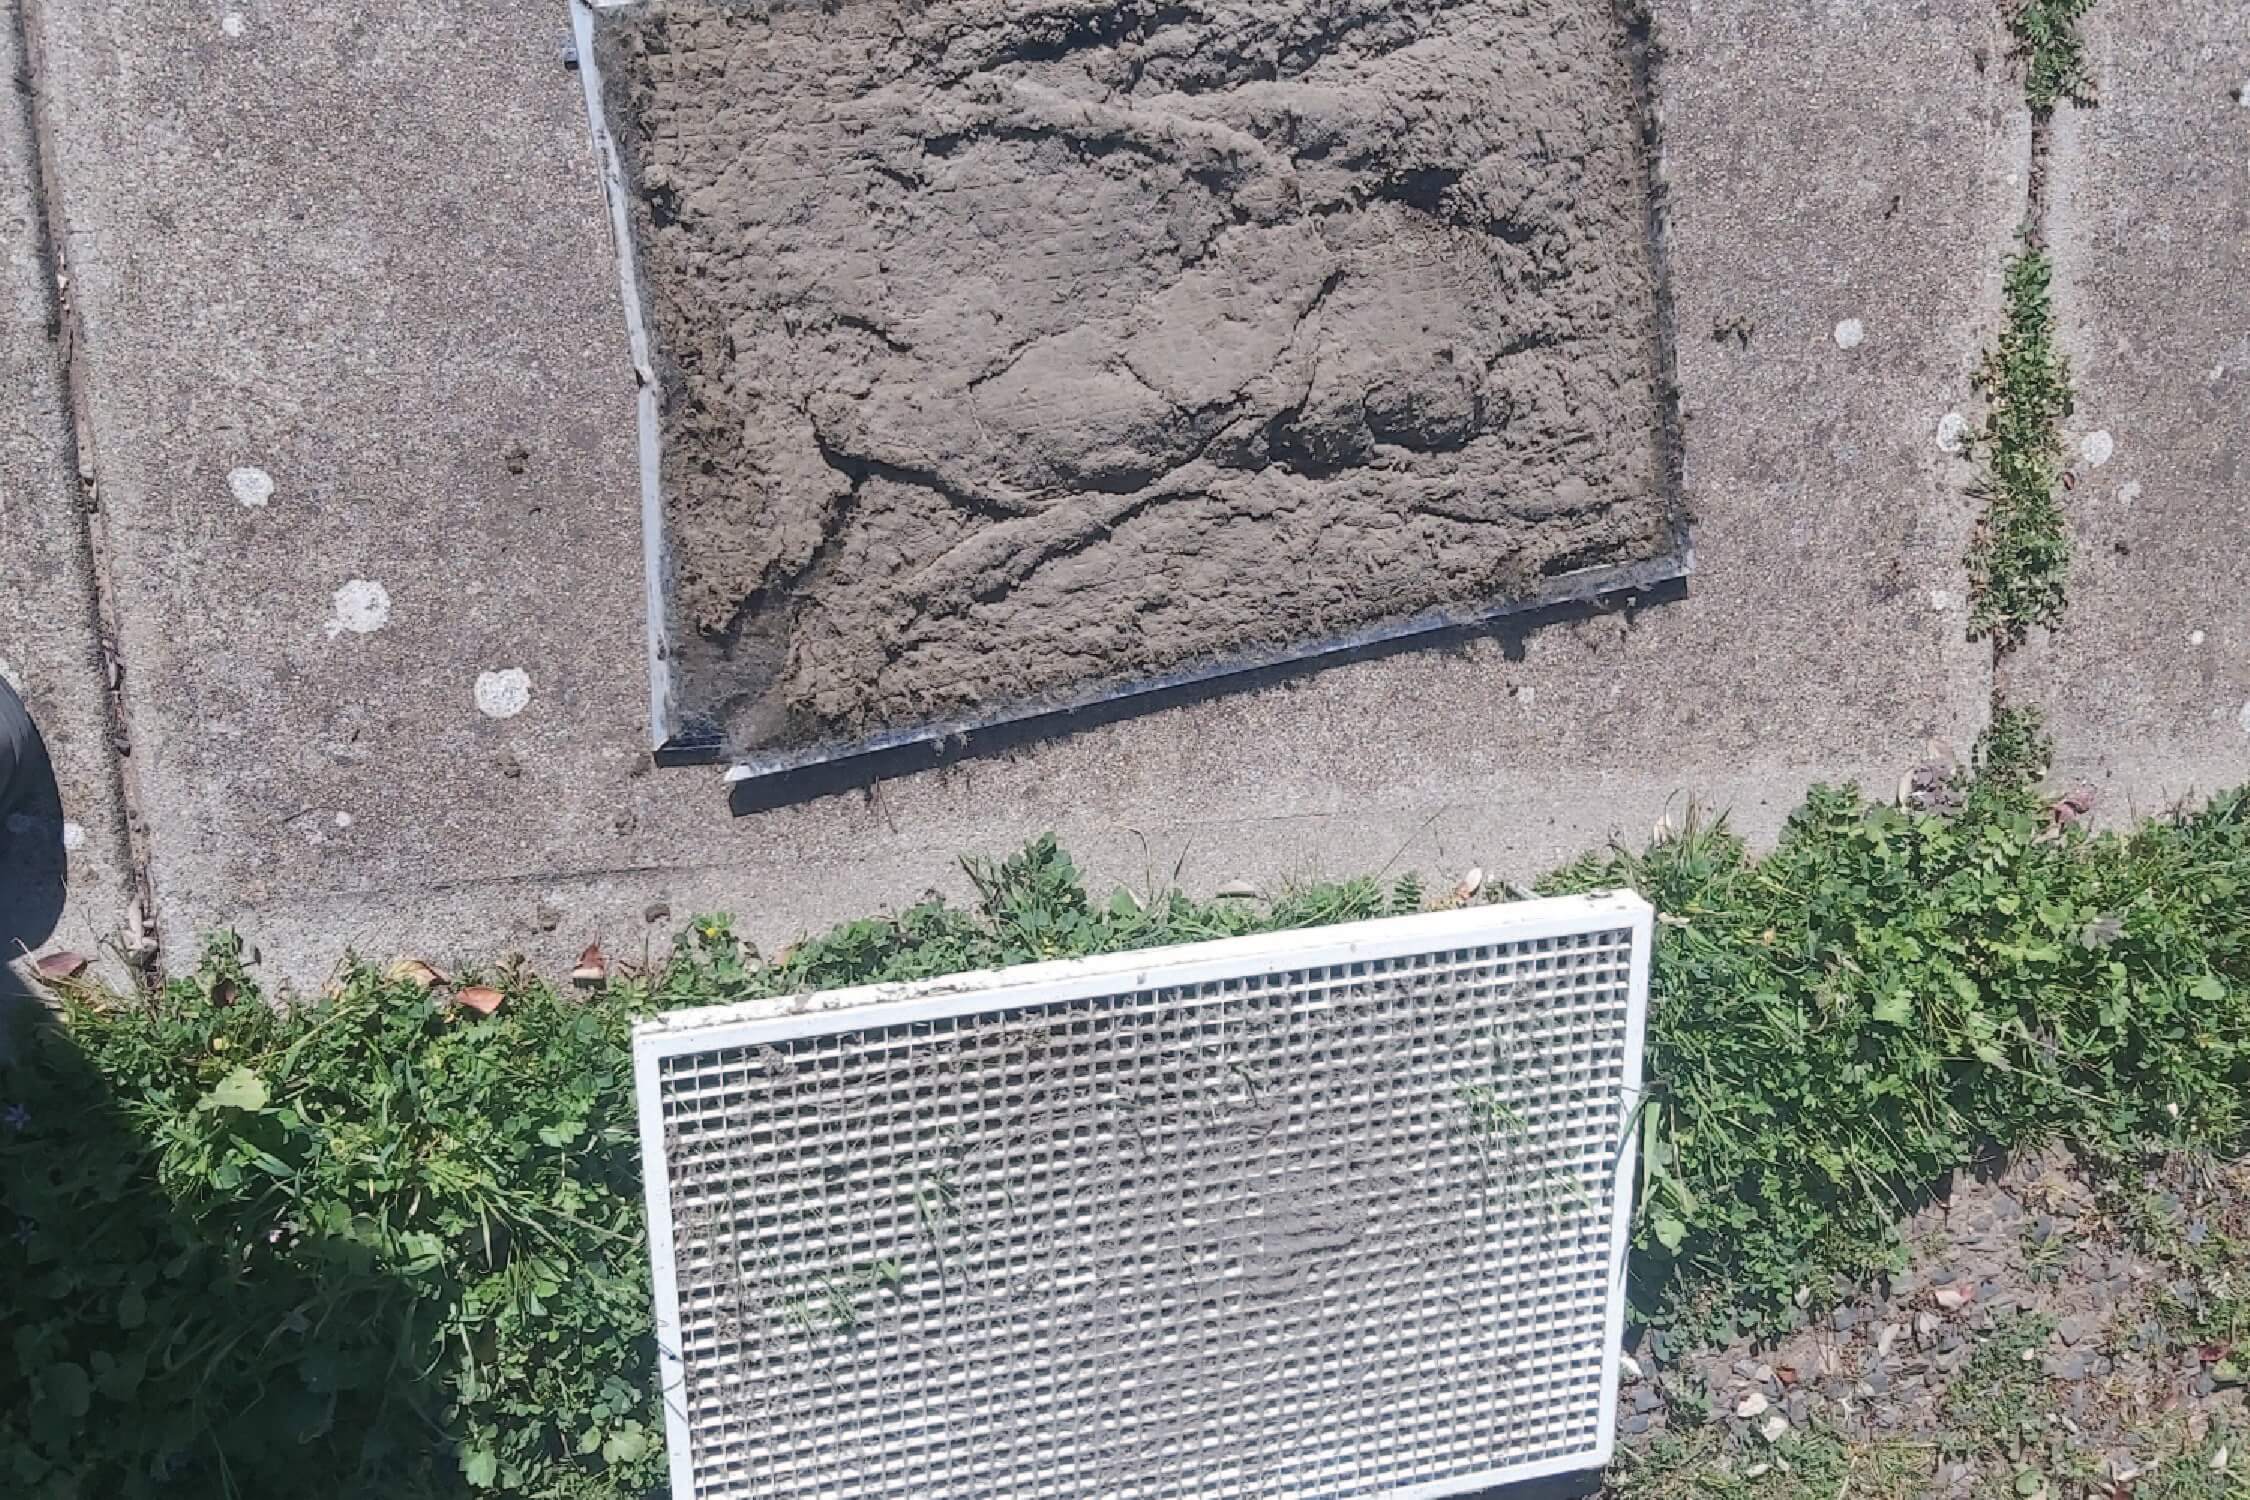 Air-conditioner’s dirty secret